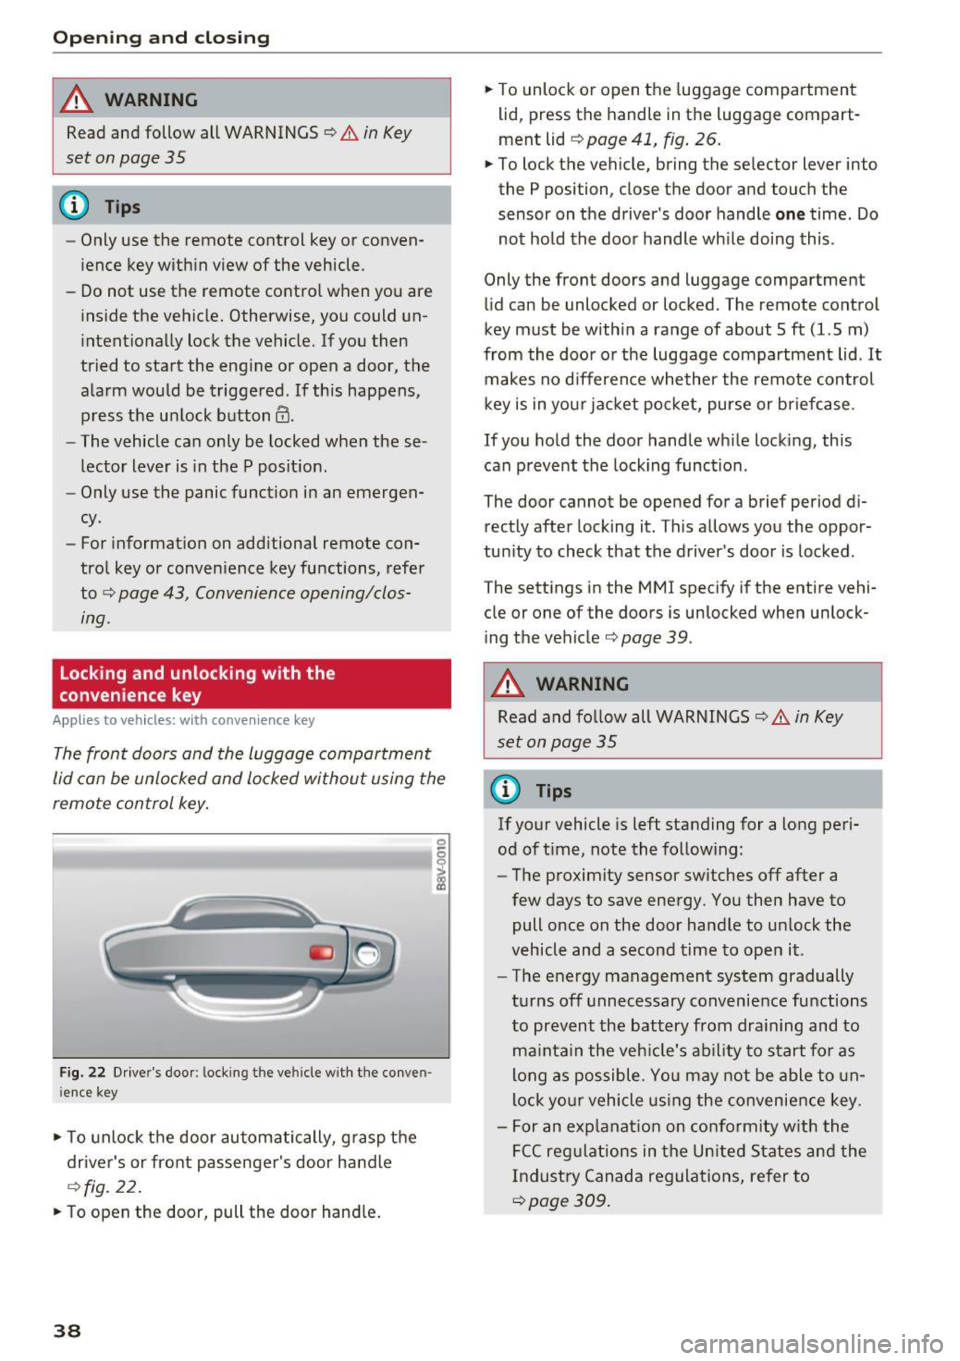 AUDI S3 2016 Owners Guide Opening  and clo sin g 
A WARNING 
Read and follow all  WARNINGS¢.& in Key 
set  on page 
3 5 
@ Tips 
- Only use the  remote  control  key or conven­
ience key within view of the  vehicle. 
- Do no